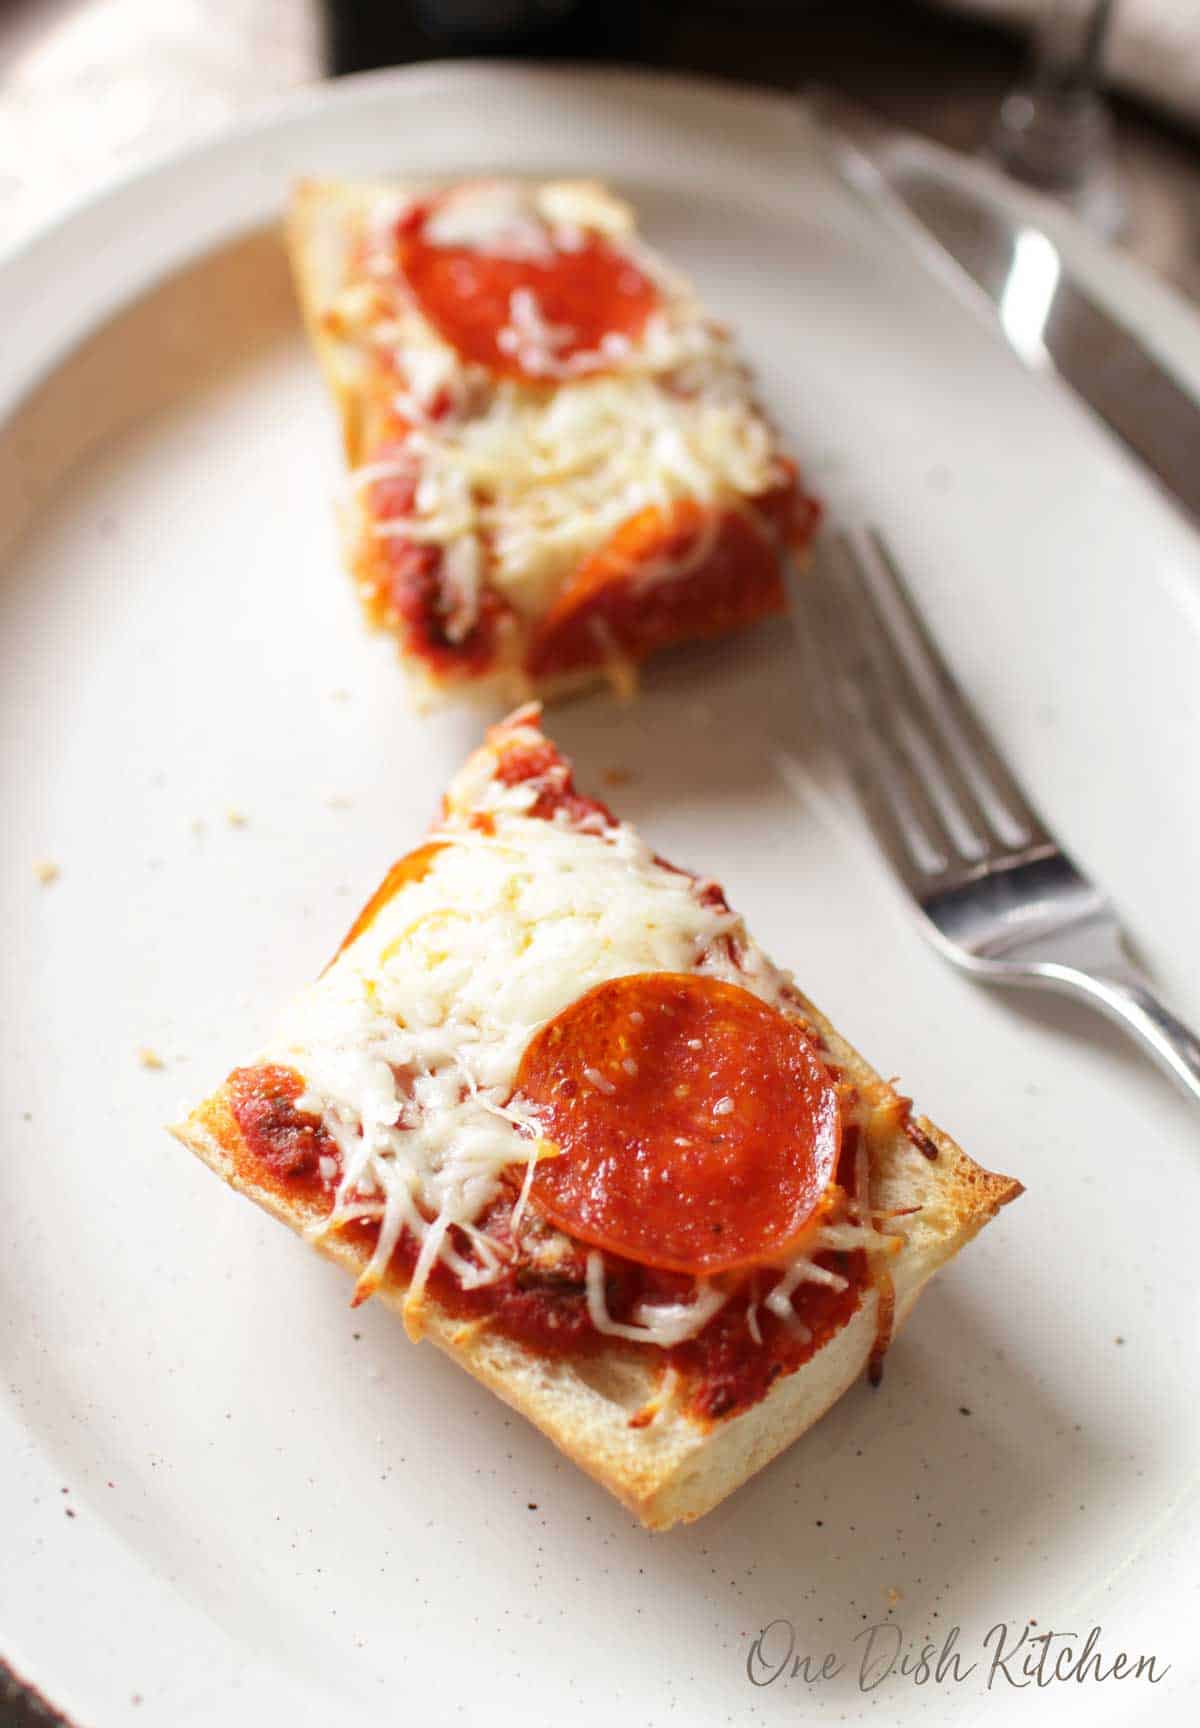 French bread pizza cut in half that is topped with mozzarella cheese and pepperoni slices plated next to a fork